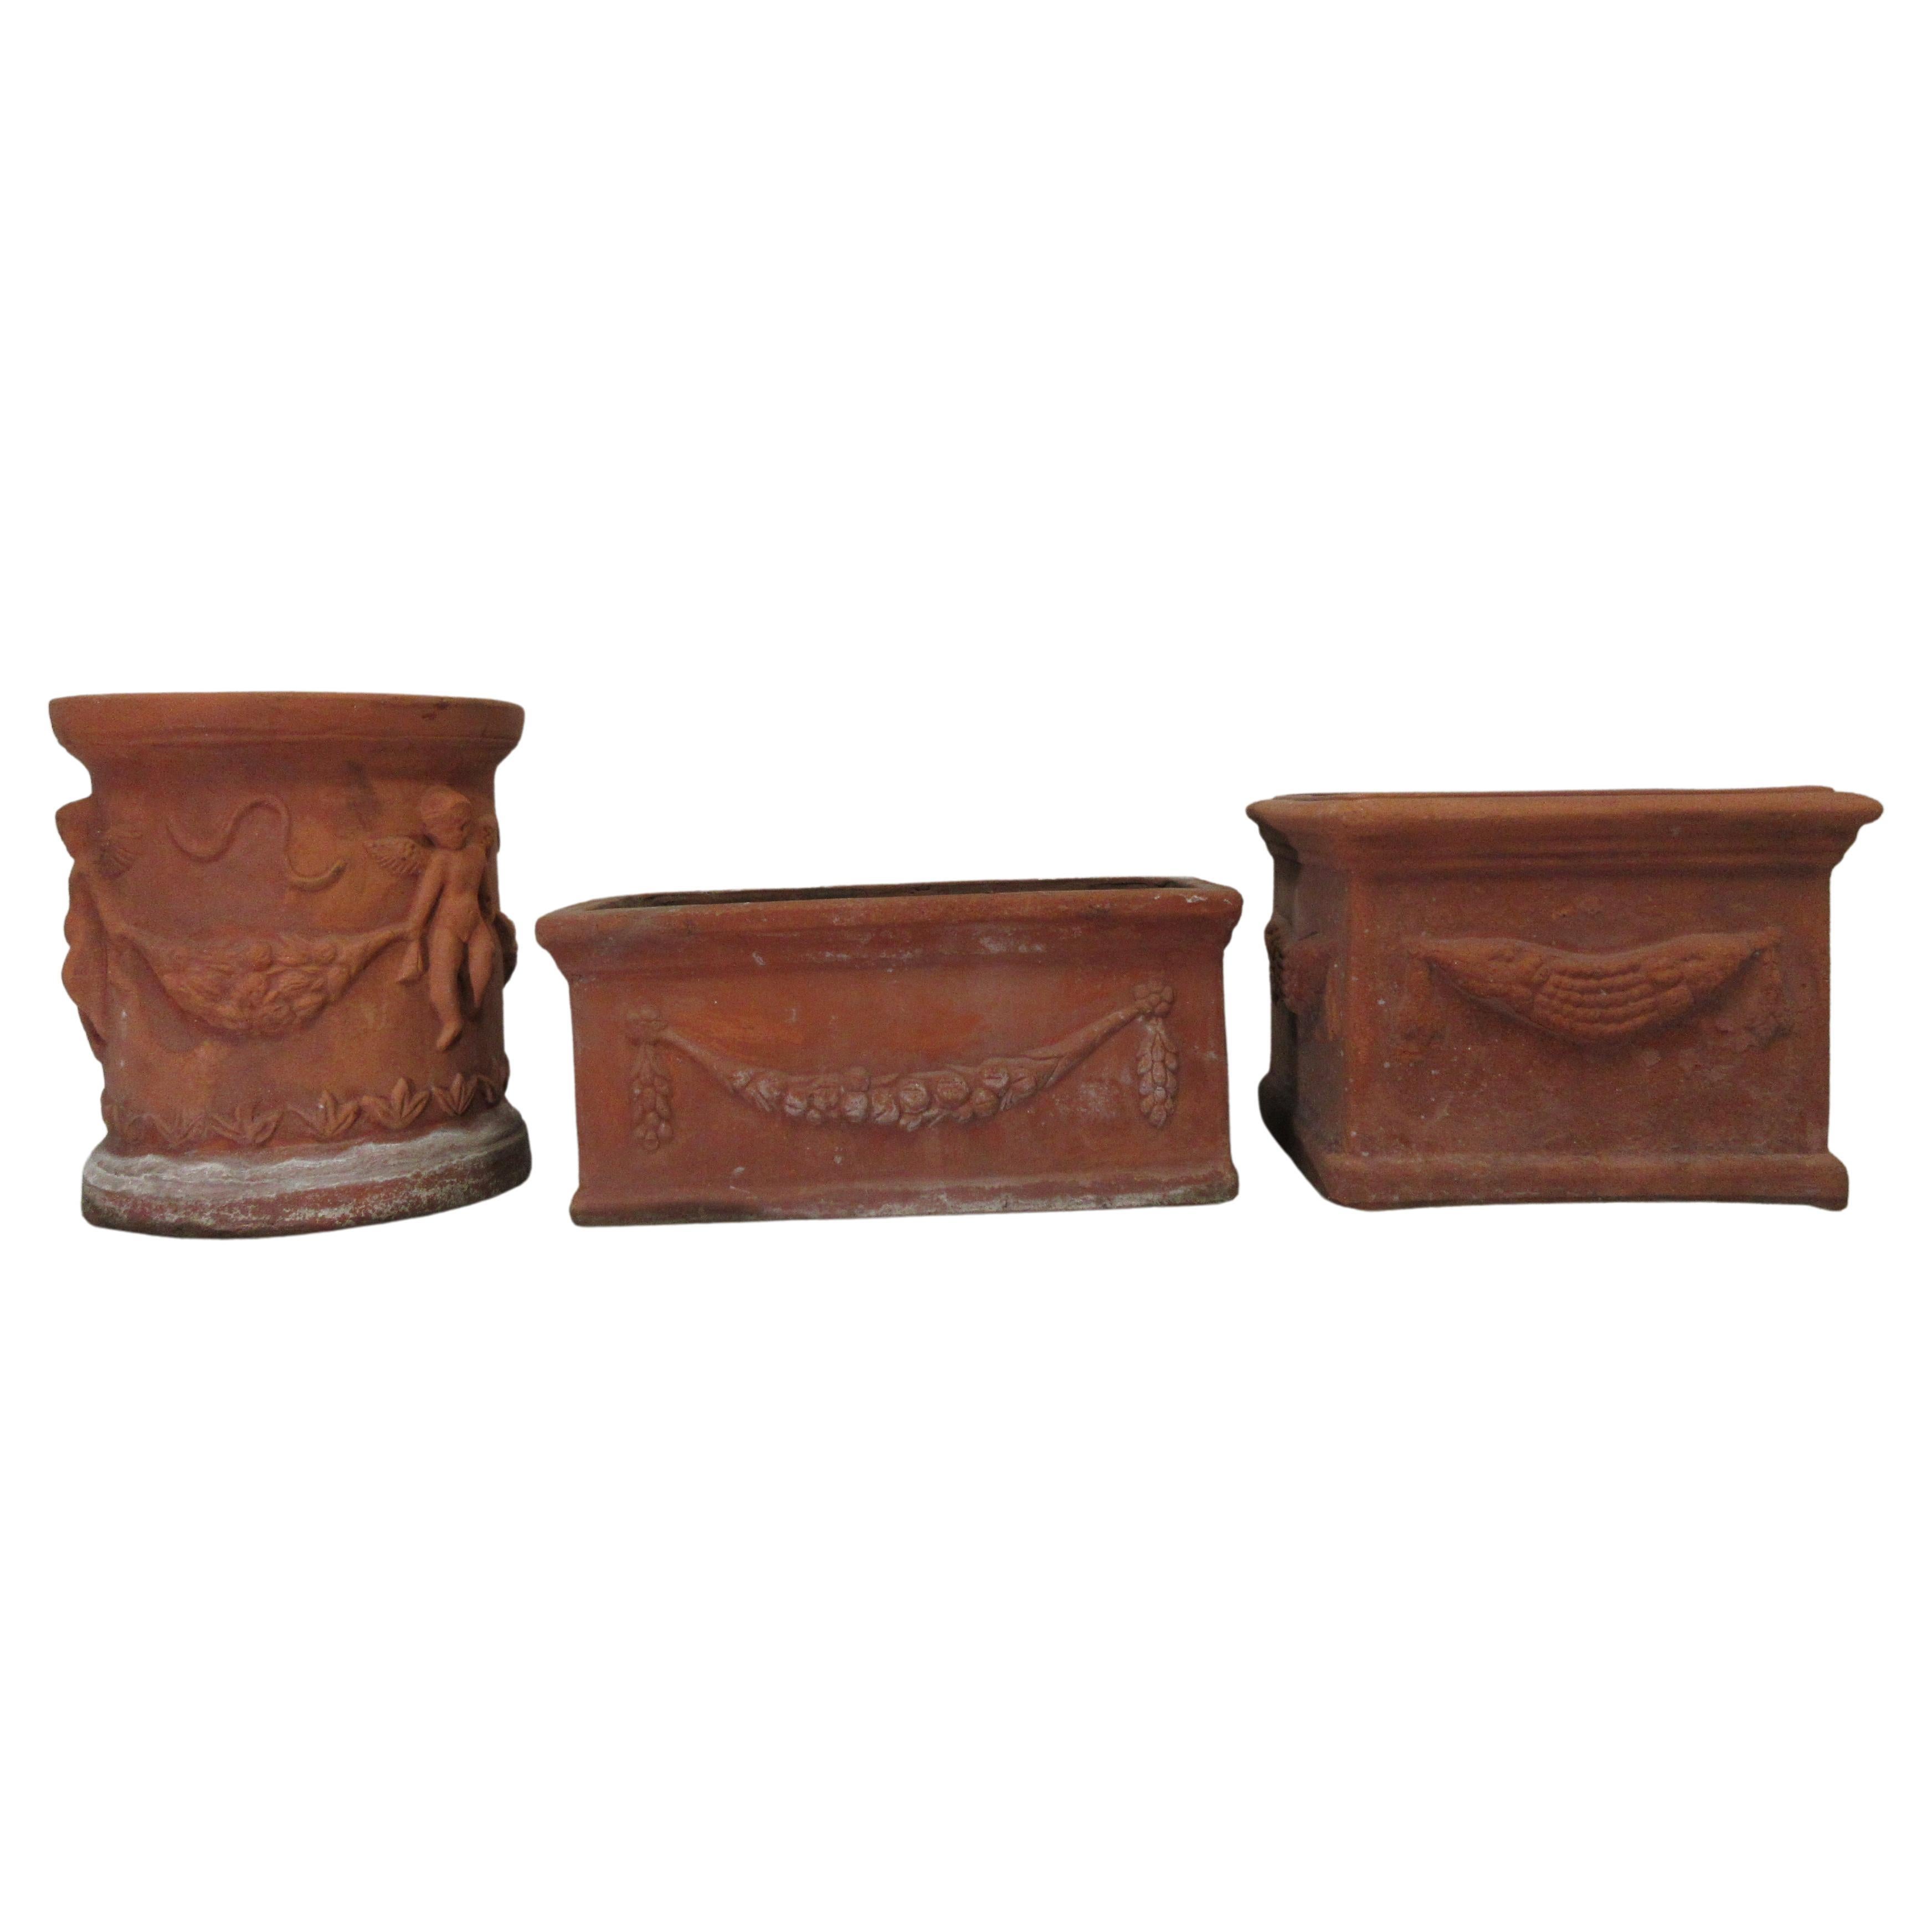 3 Gustavian Style Planters For Sale